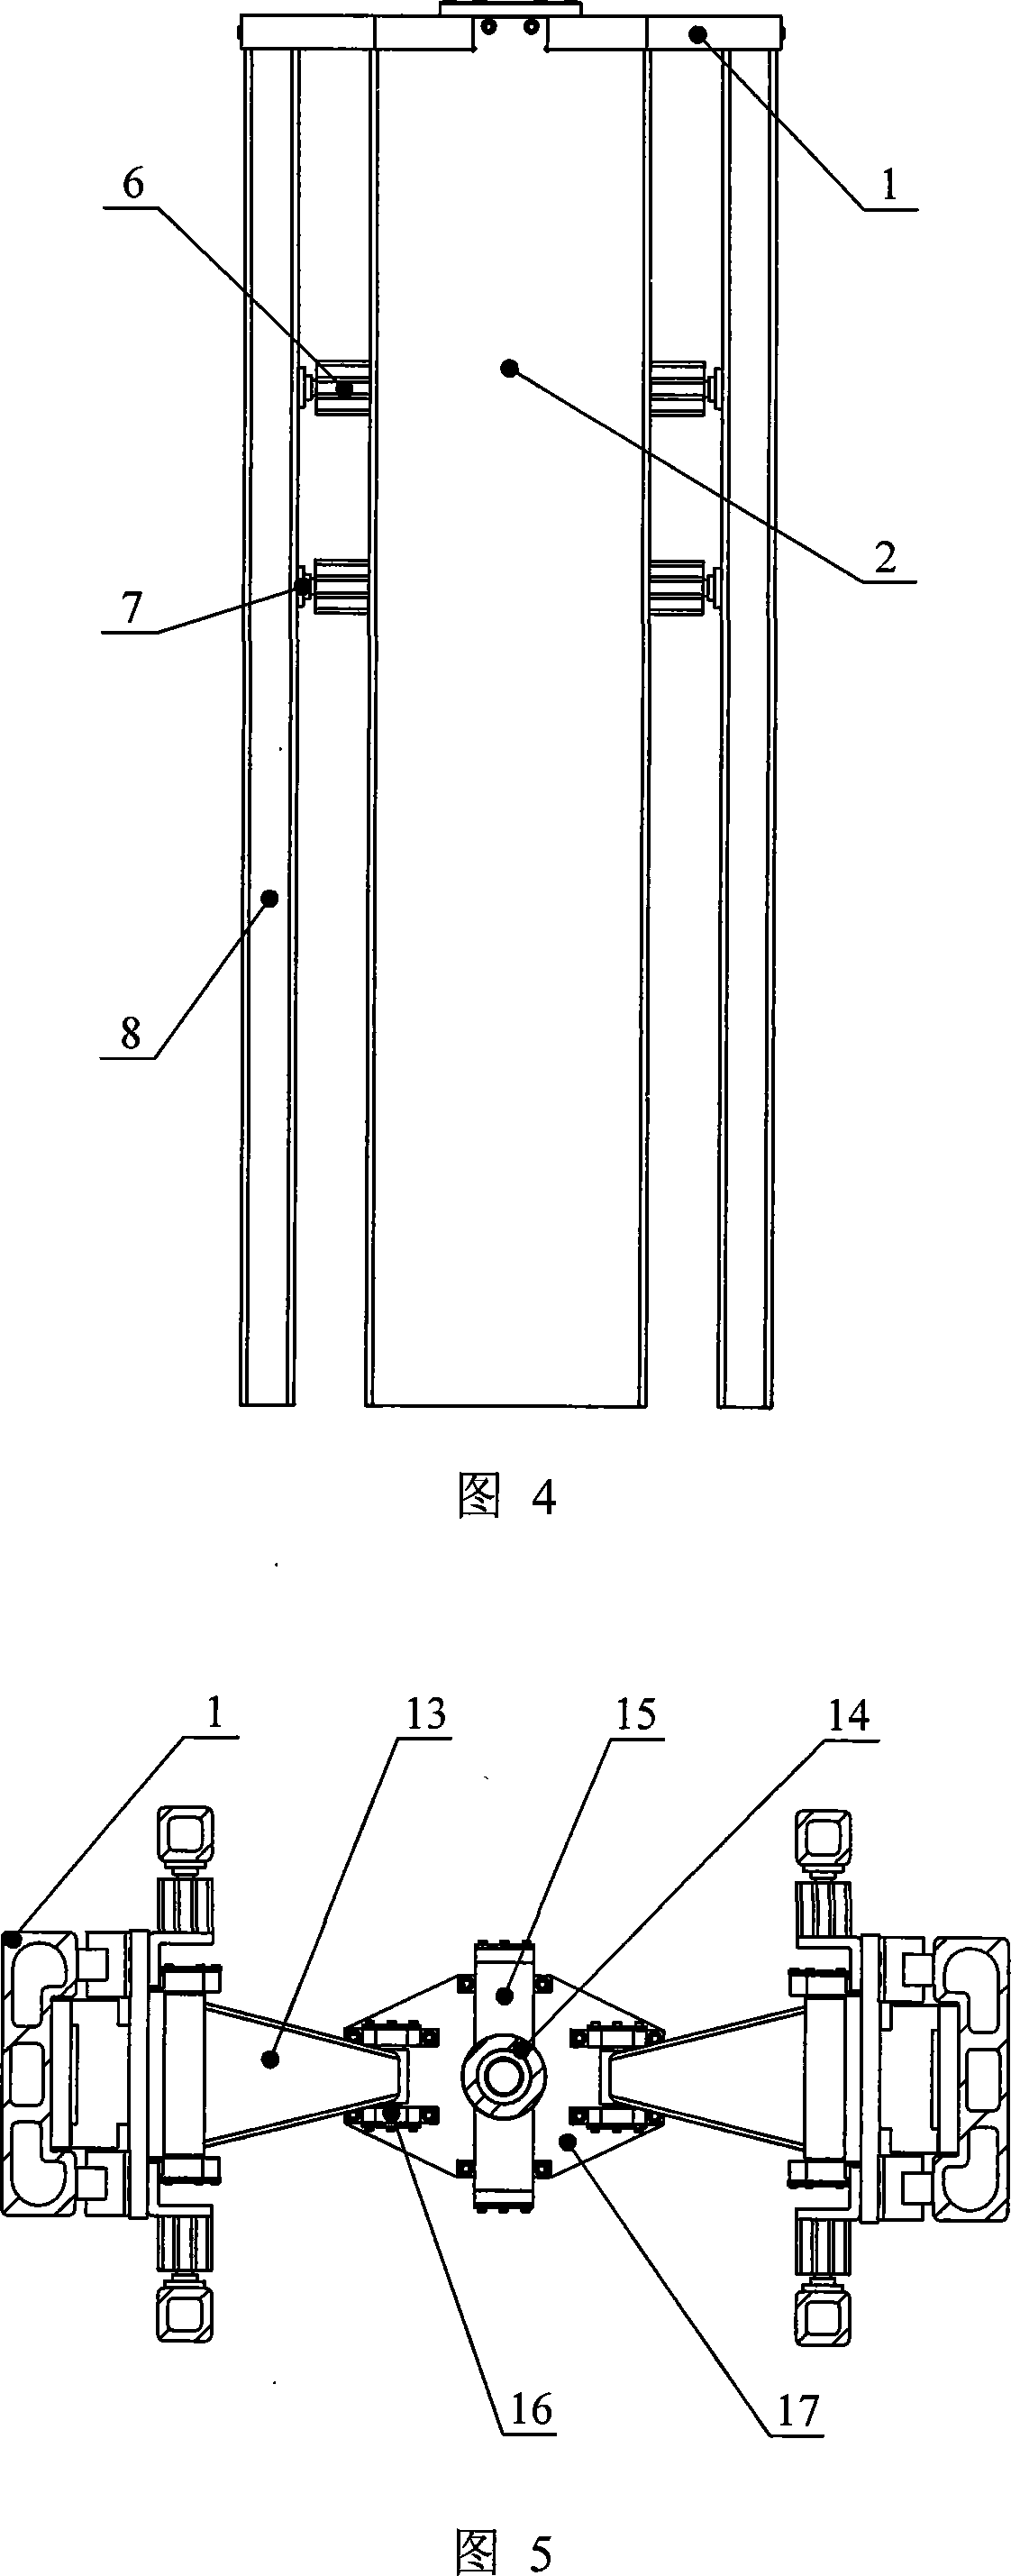 Platform of principal axis with paralleled Z, A two degrees of freedom driven by linear motor